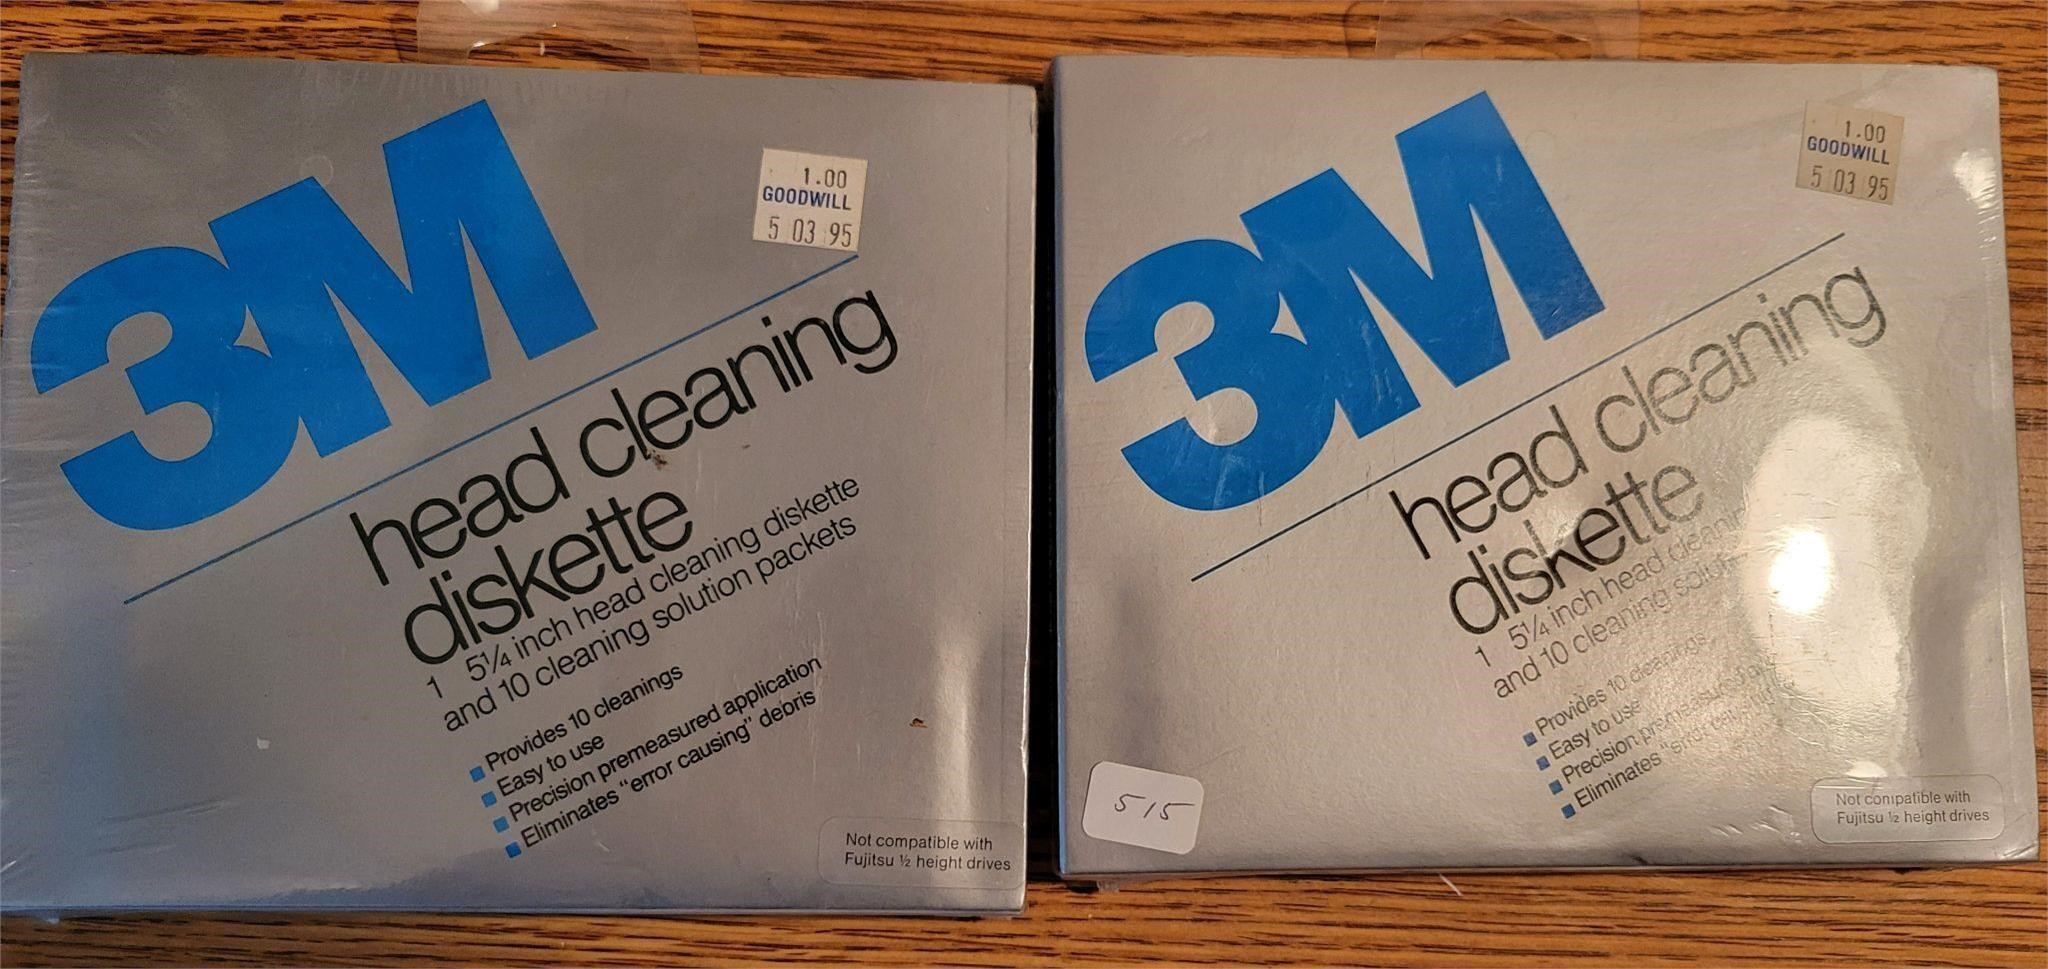 2 Sealed 3M Head Cleaning Diskette 5 1/4"